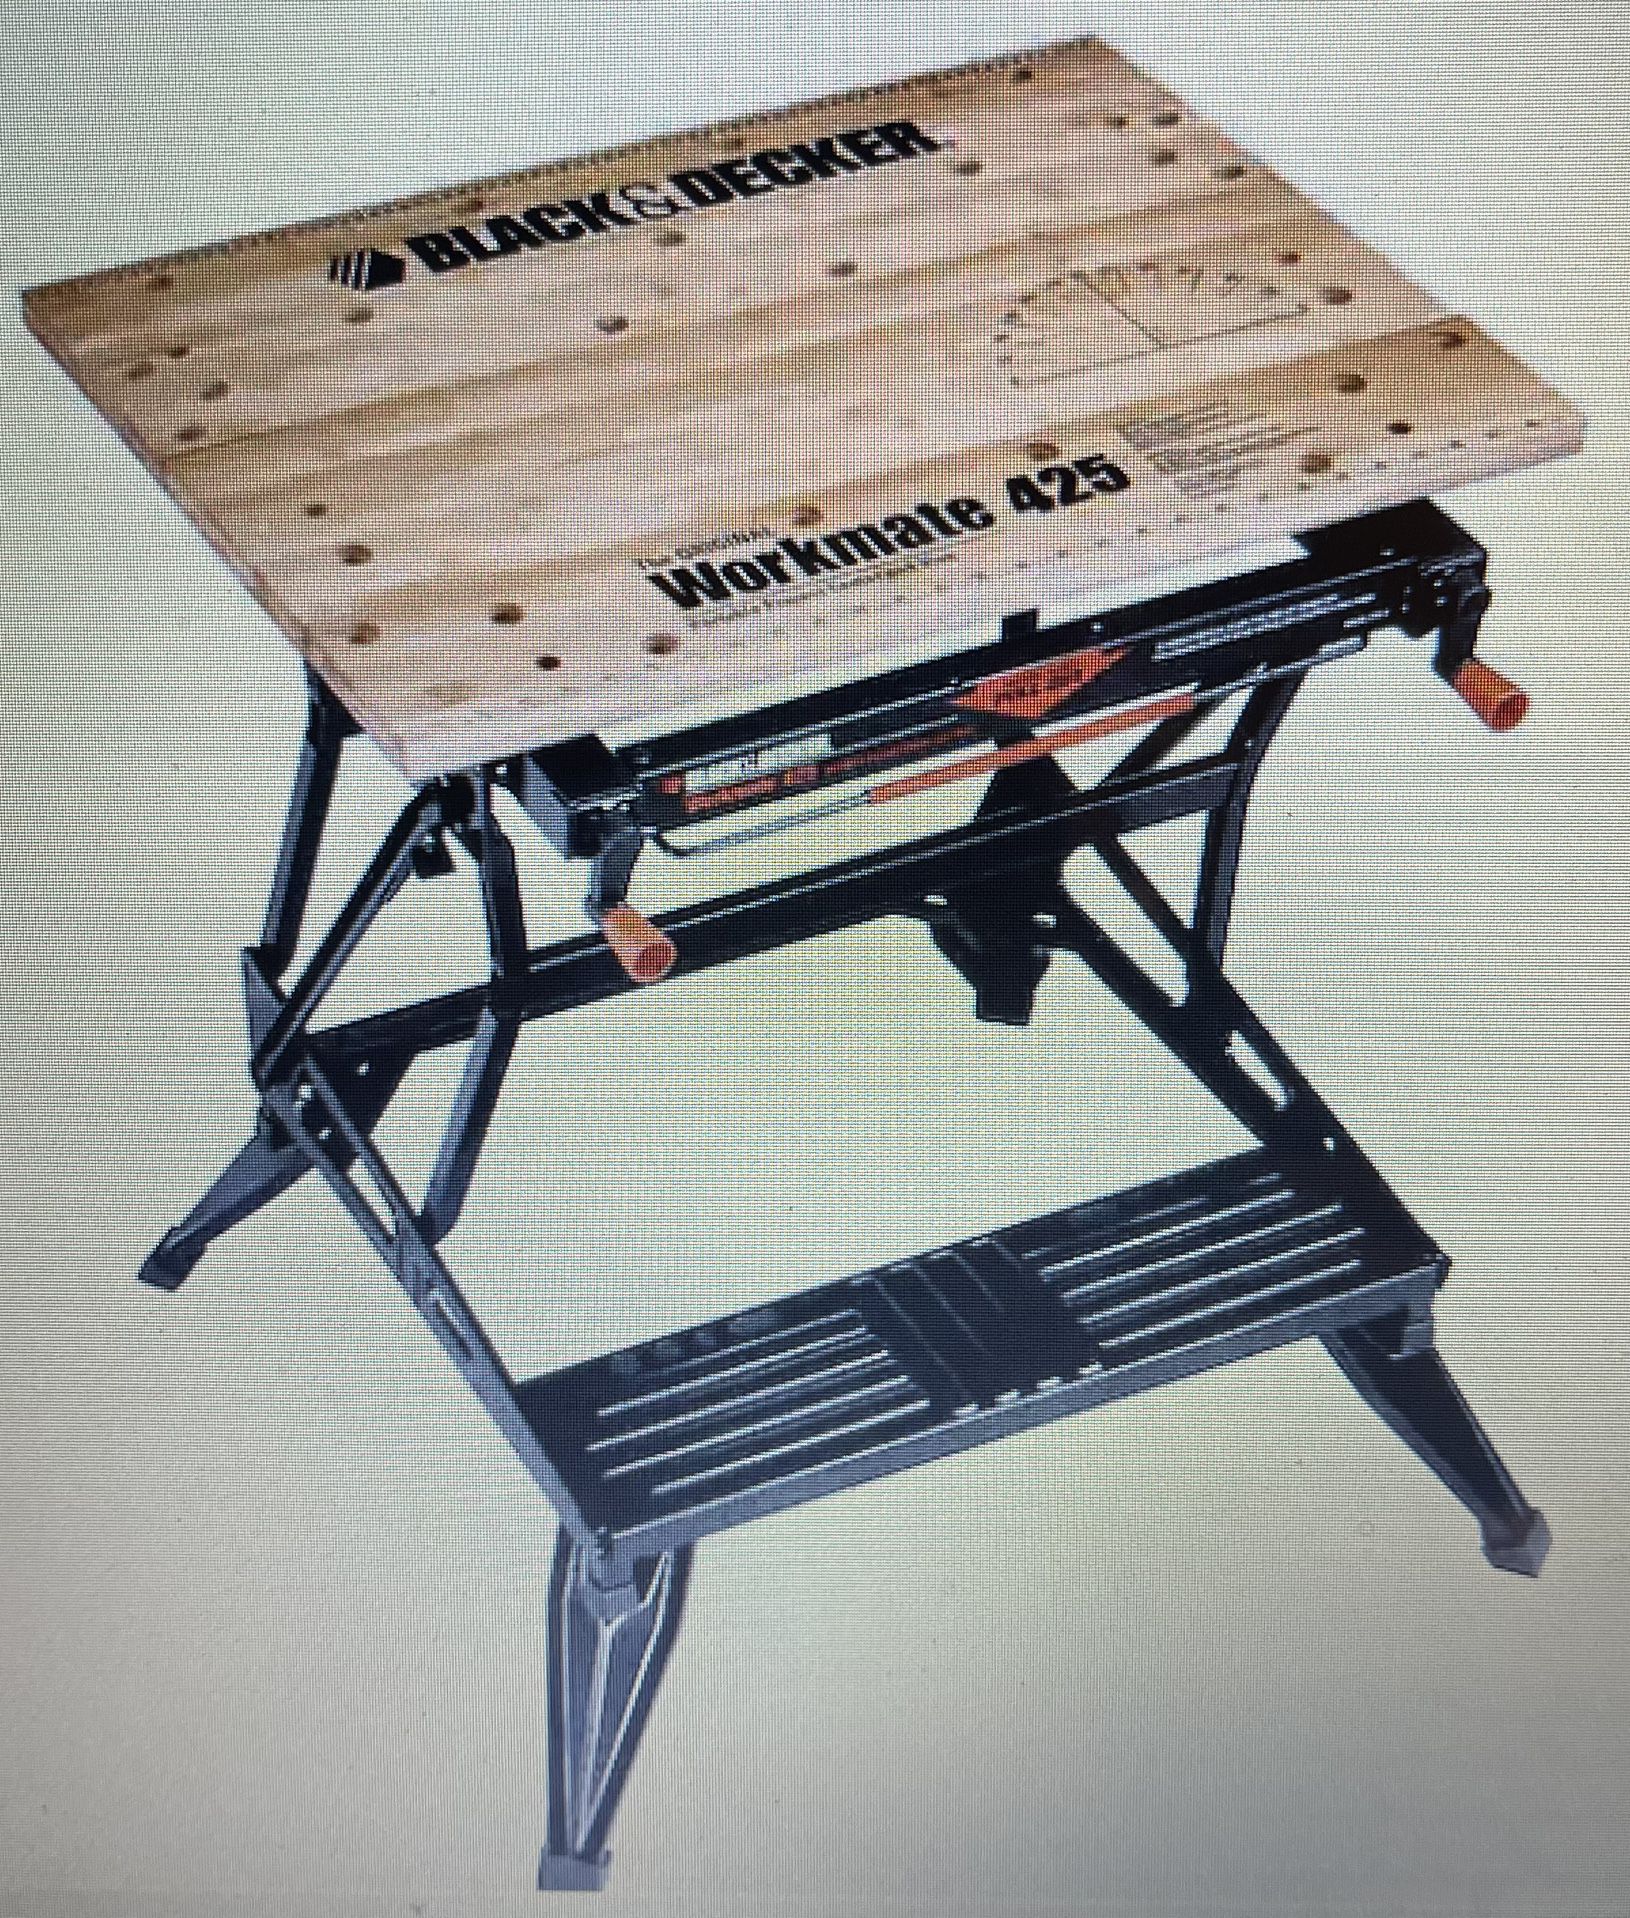 Workmate Workbench $20—- Space Saver! Folds Completely Flat For Storage